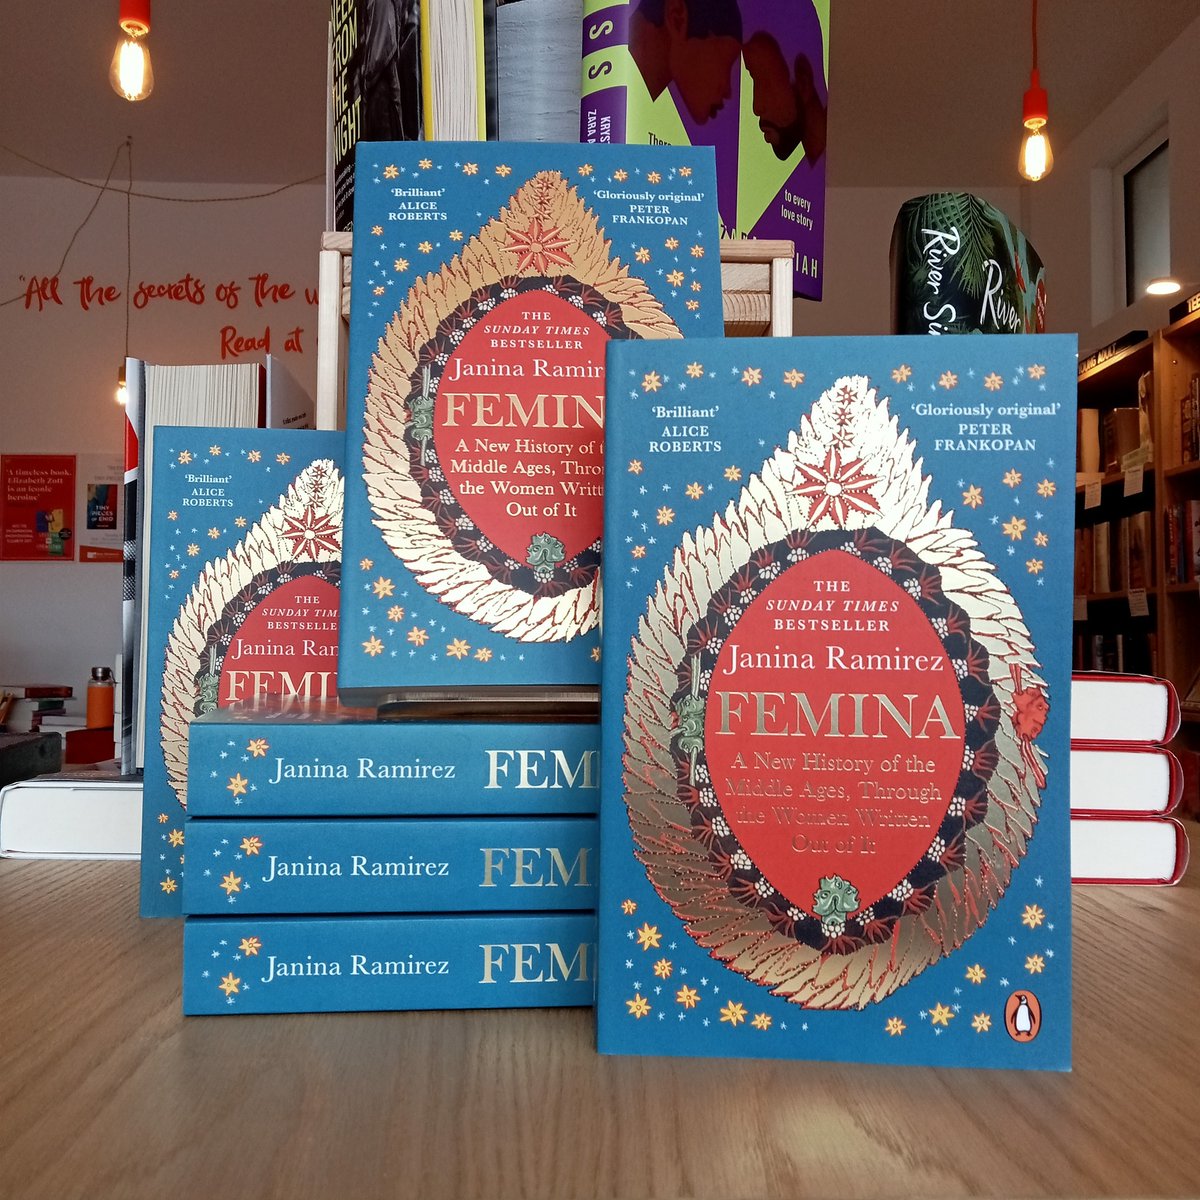 One of our favourite non-fics at the moment by @DrJaninaRamirez - and it's now in paperback📷
#maxminervas #indiebookshop #Henleaze #portishead #readinglife #bookshopping #femina #penguinstagram #penguinbooks #penguin #books #reading #currentlyreading #bookstagram #booklovers